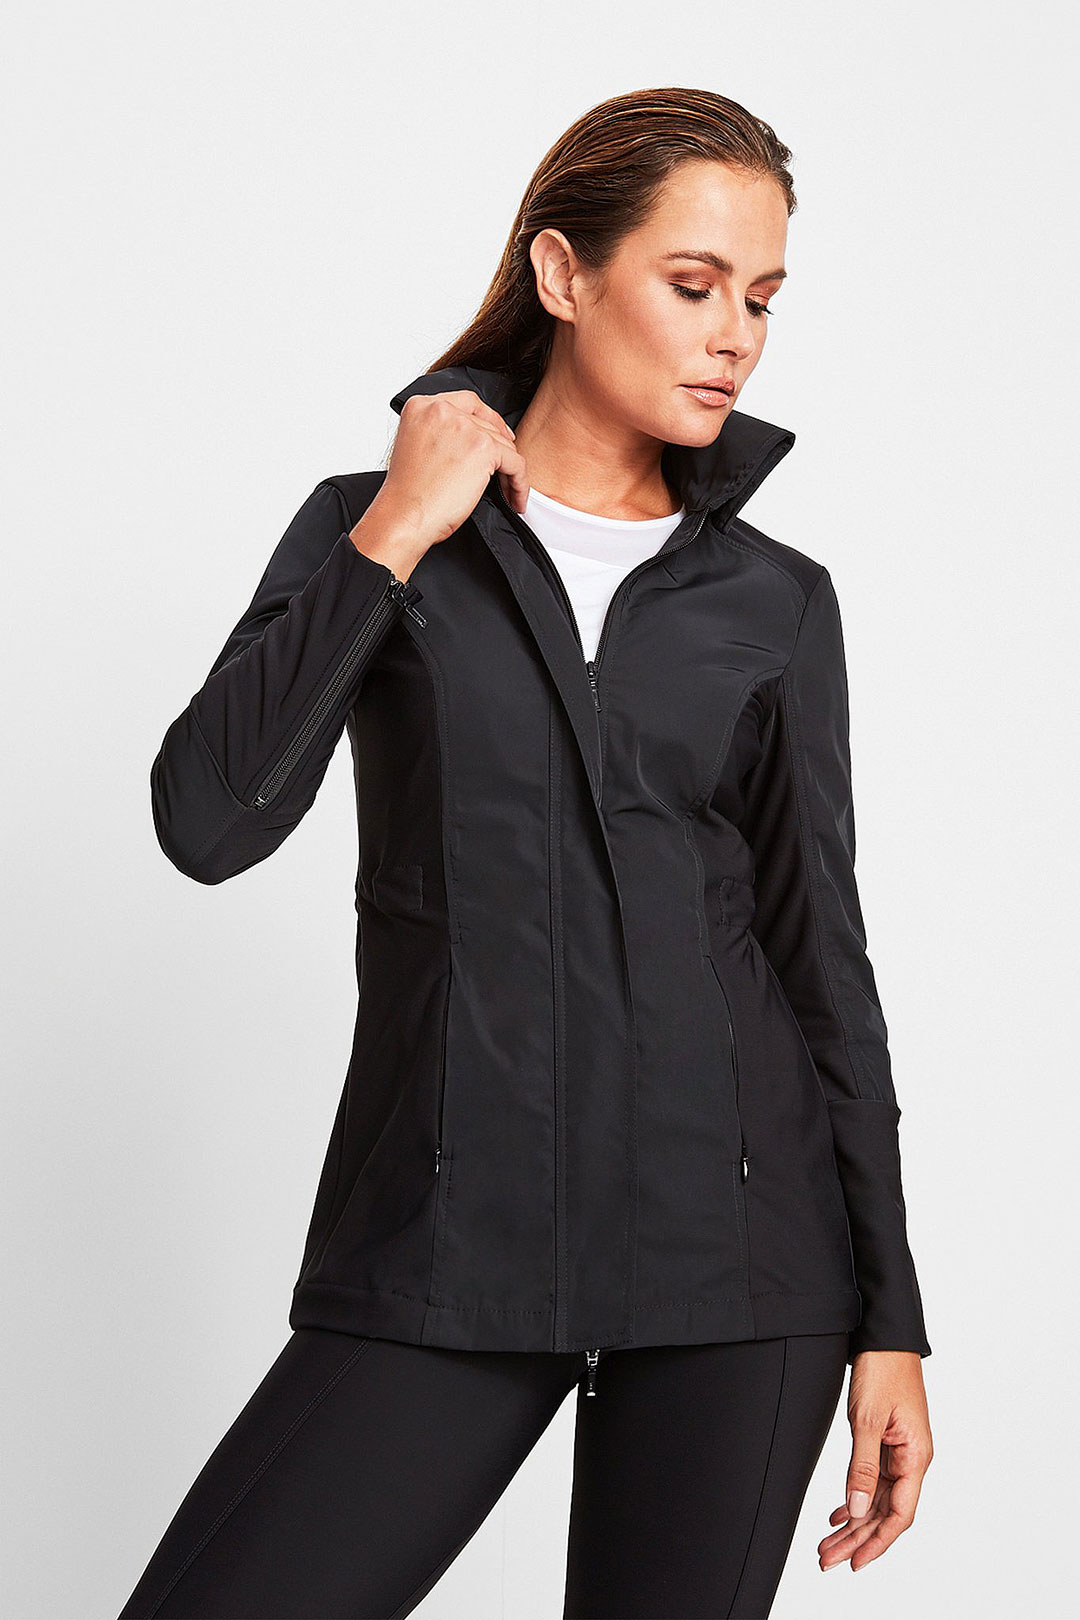 7+ Best Jackets for Travel for Any Weather » Local Adventurer » Travel ...